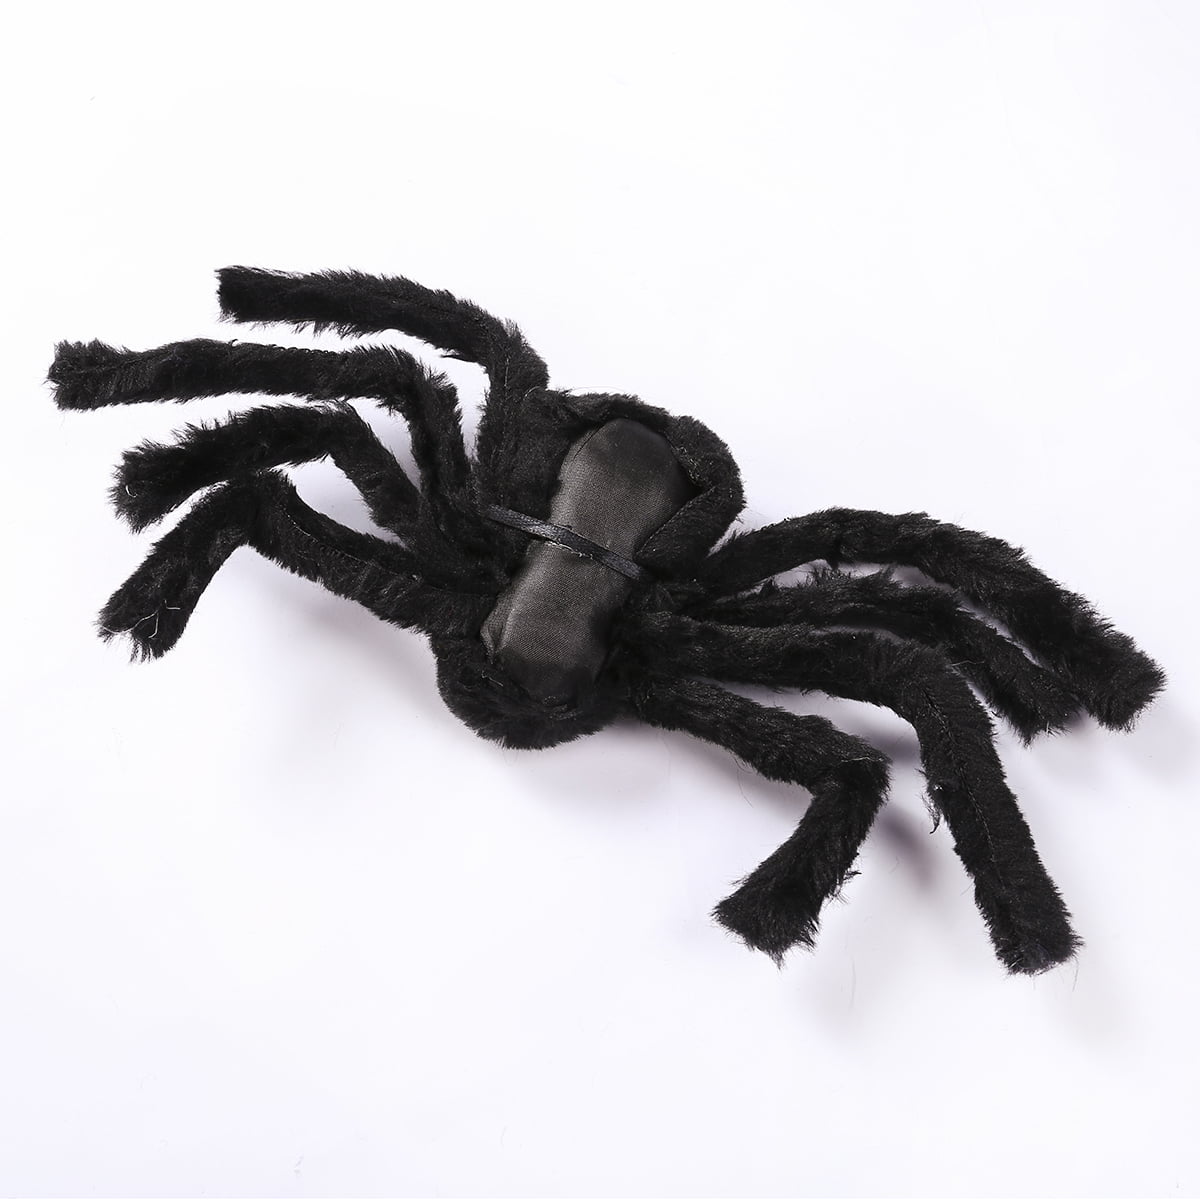 Darice Halloween Spider Pick 3 x 12 inches 2 Assorted Colors w 